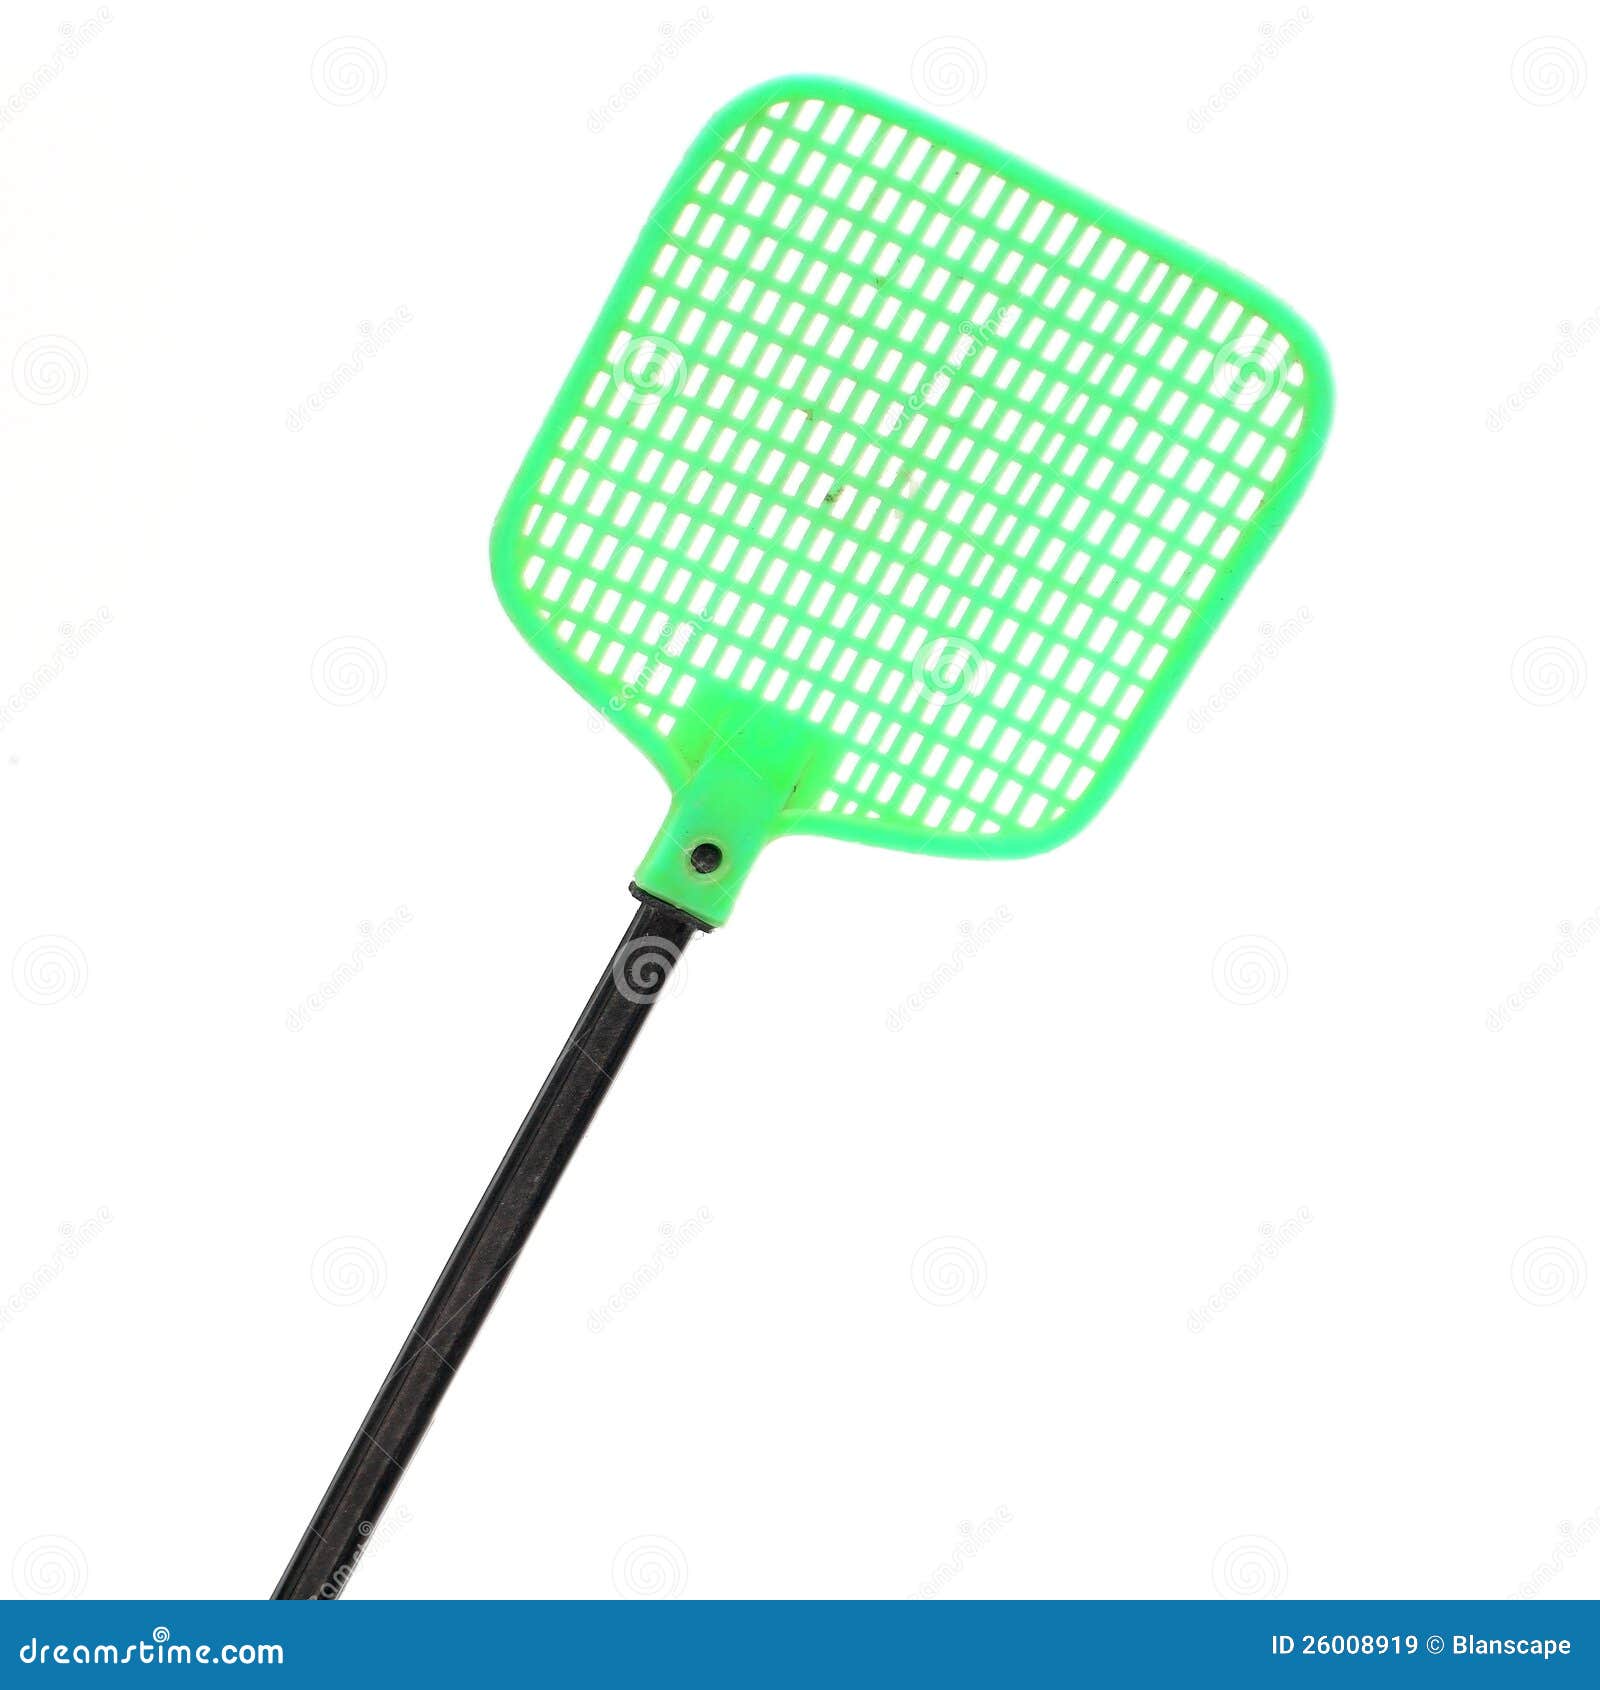 fly swatter clipart - photo #14